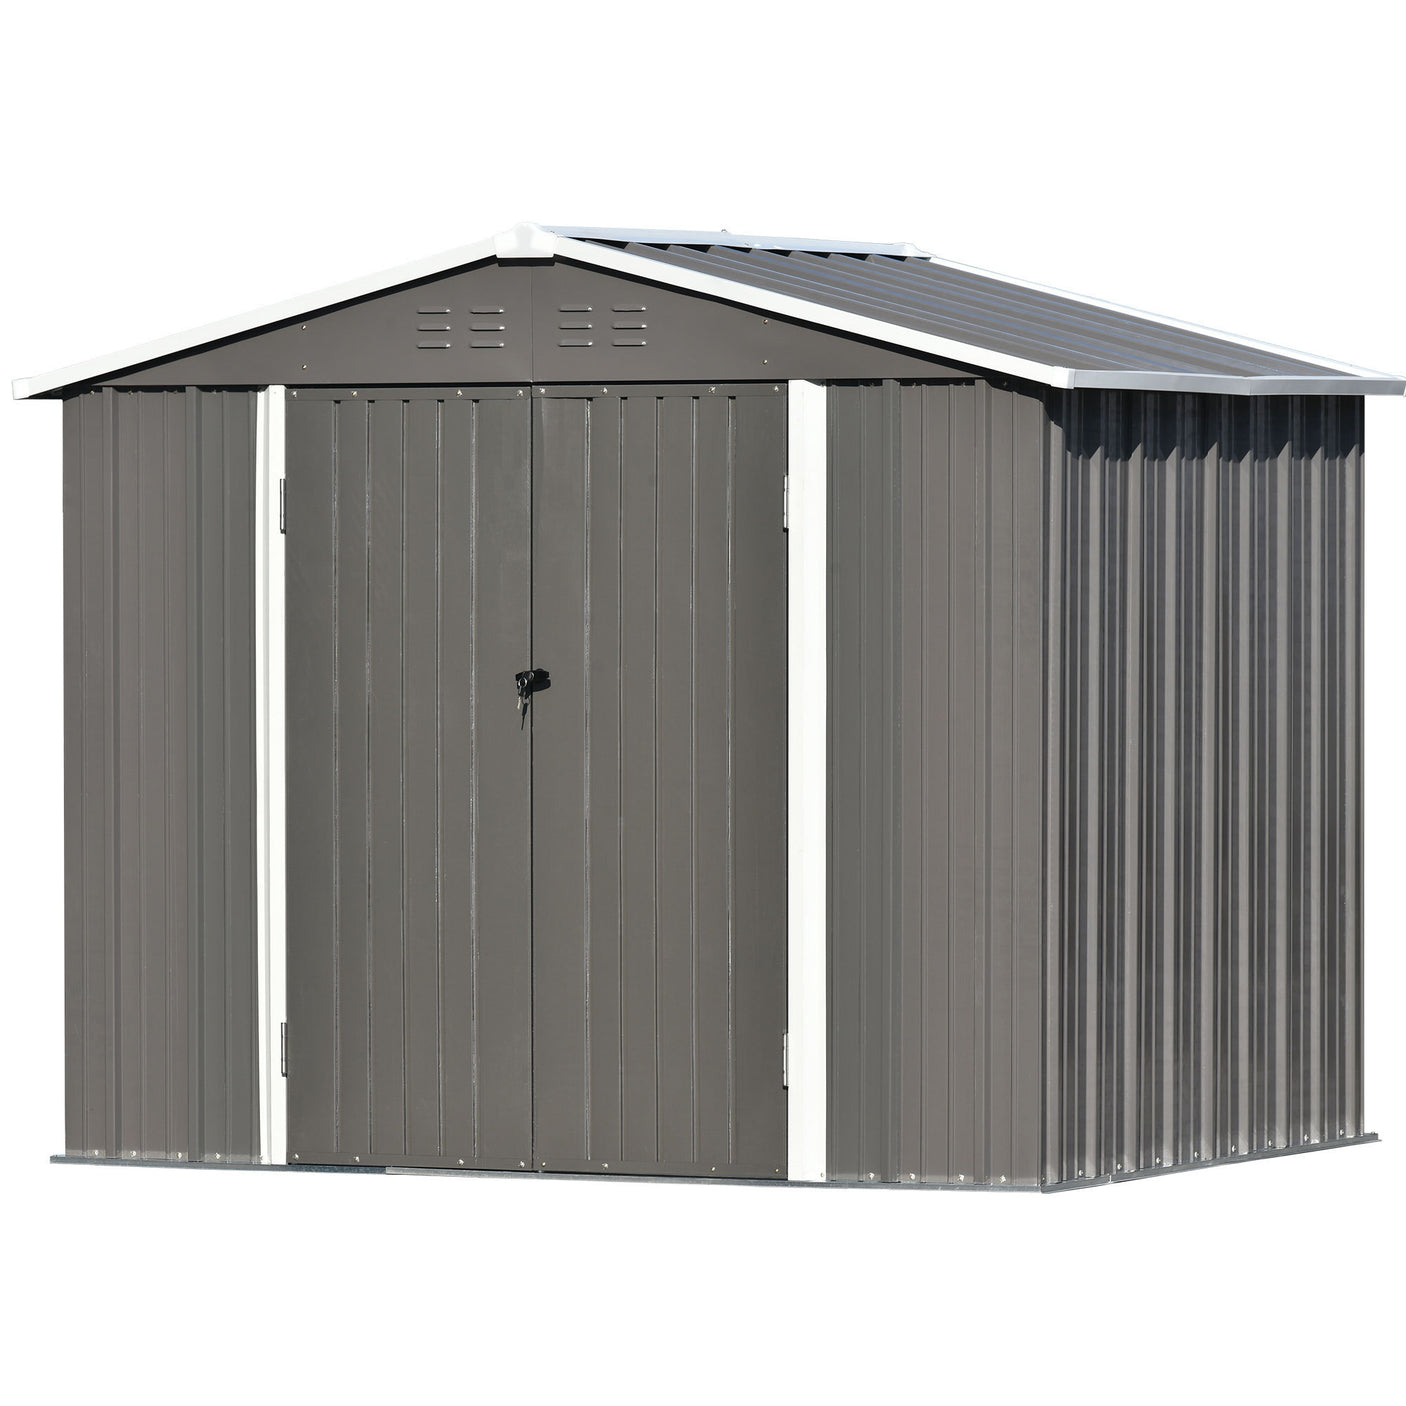 TOPMAX Patio 8ft x6ft Bike Shed Garden Shed, Metal Storage Shed with Lockable Doors, Tool Cabinet with Vents and Foundation Frame for Backyard, Lawn, Garden, Gray